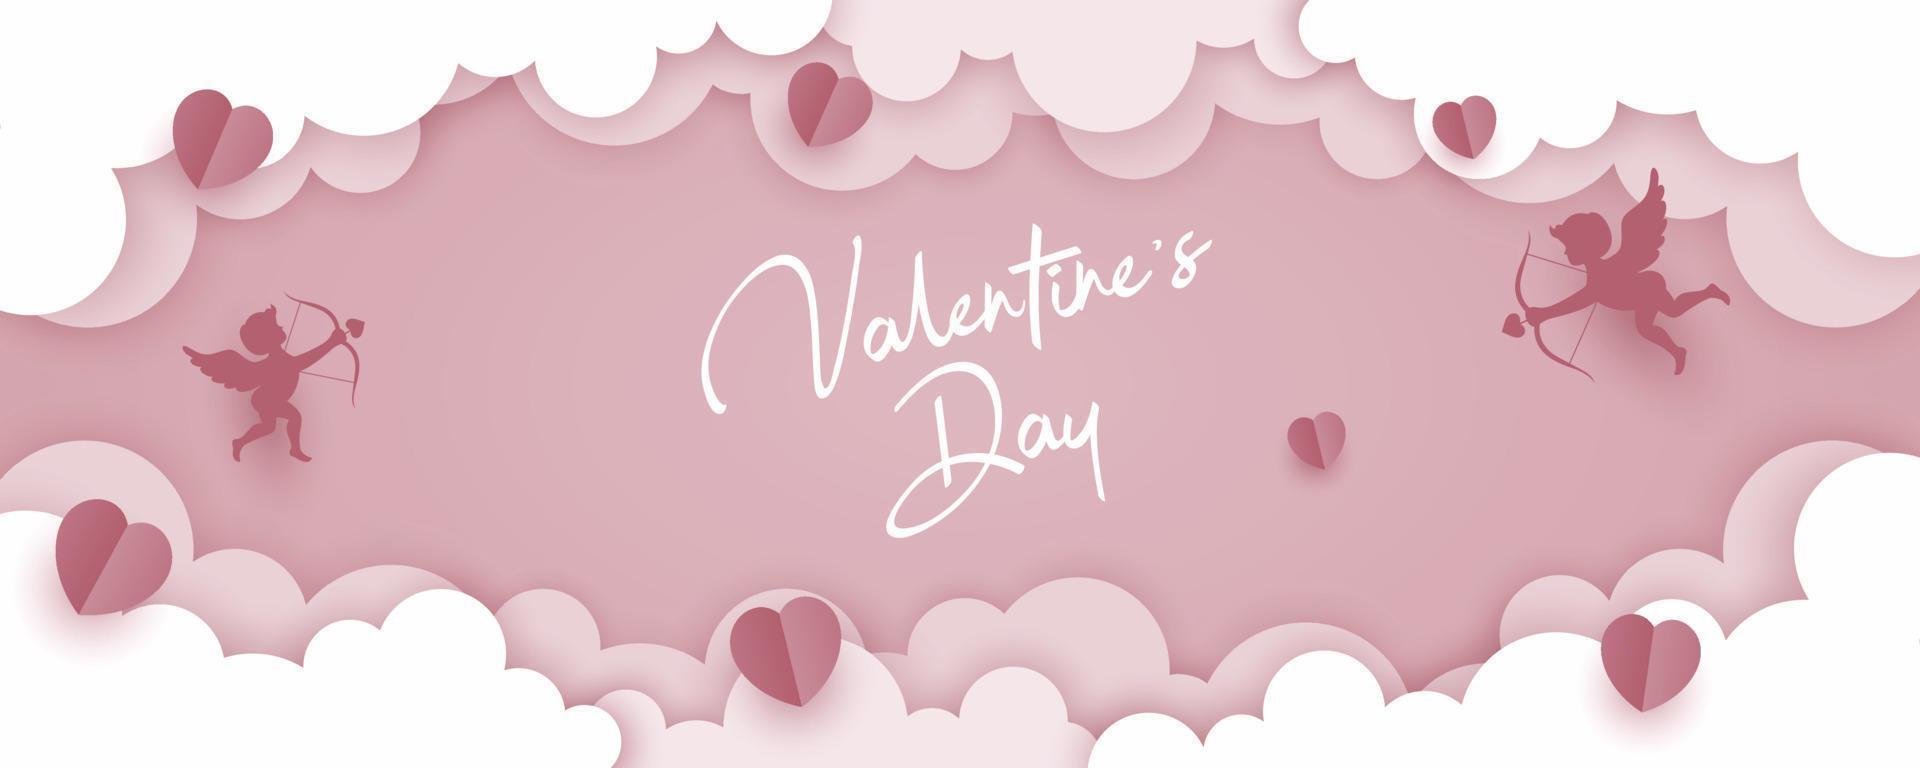 Happy Valentine's Day banner in paper art style vector